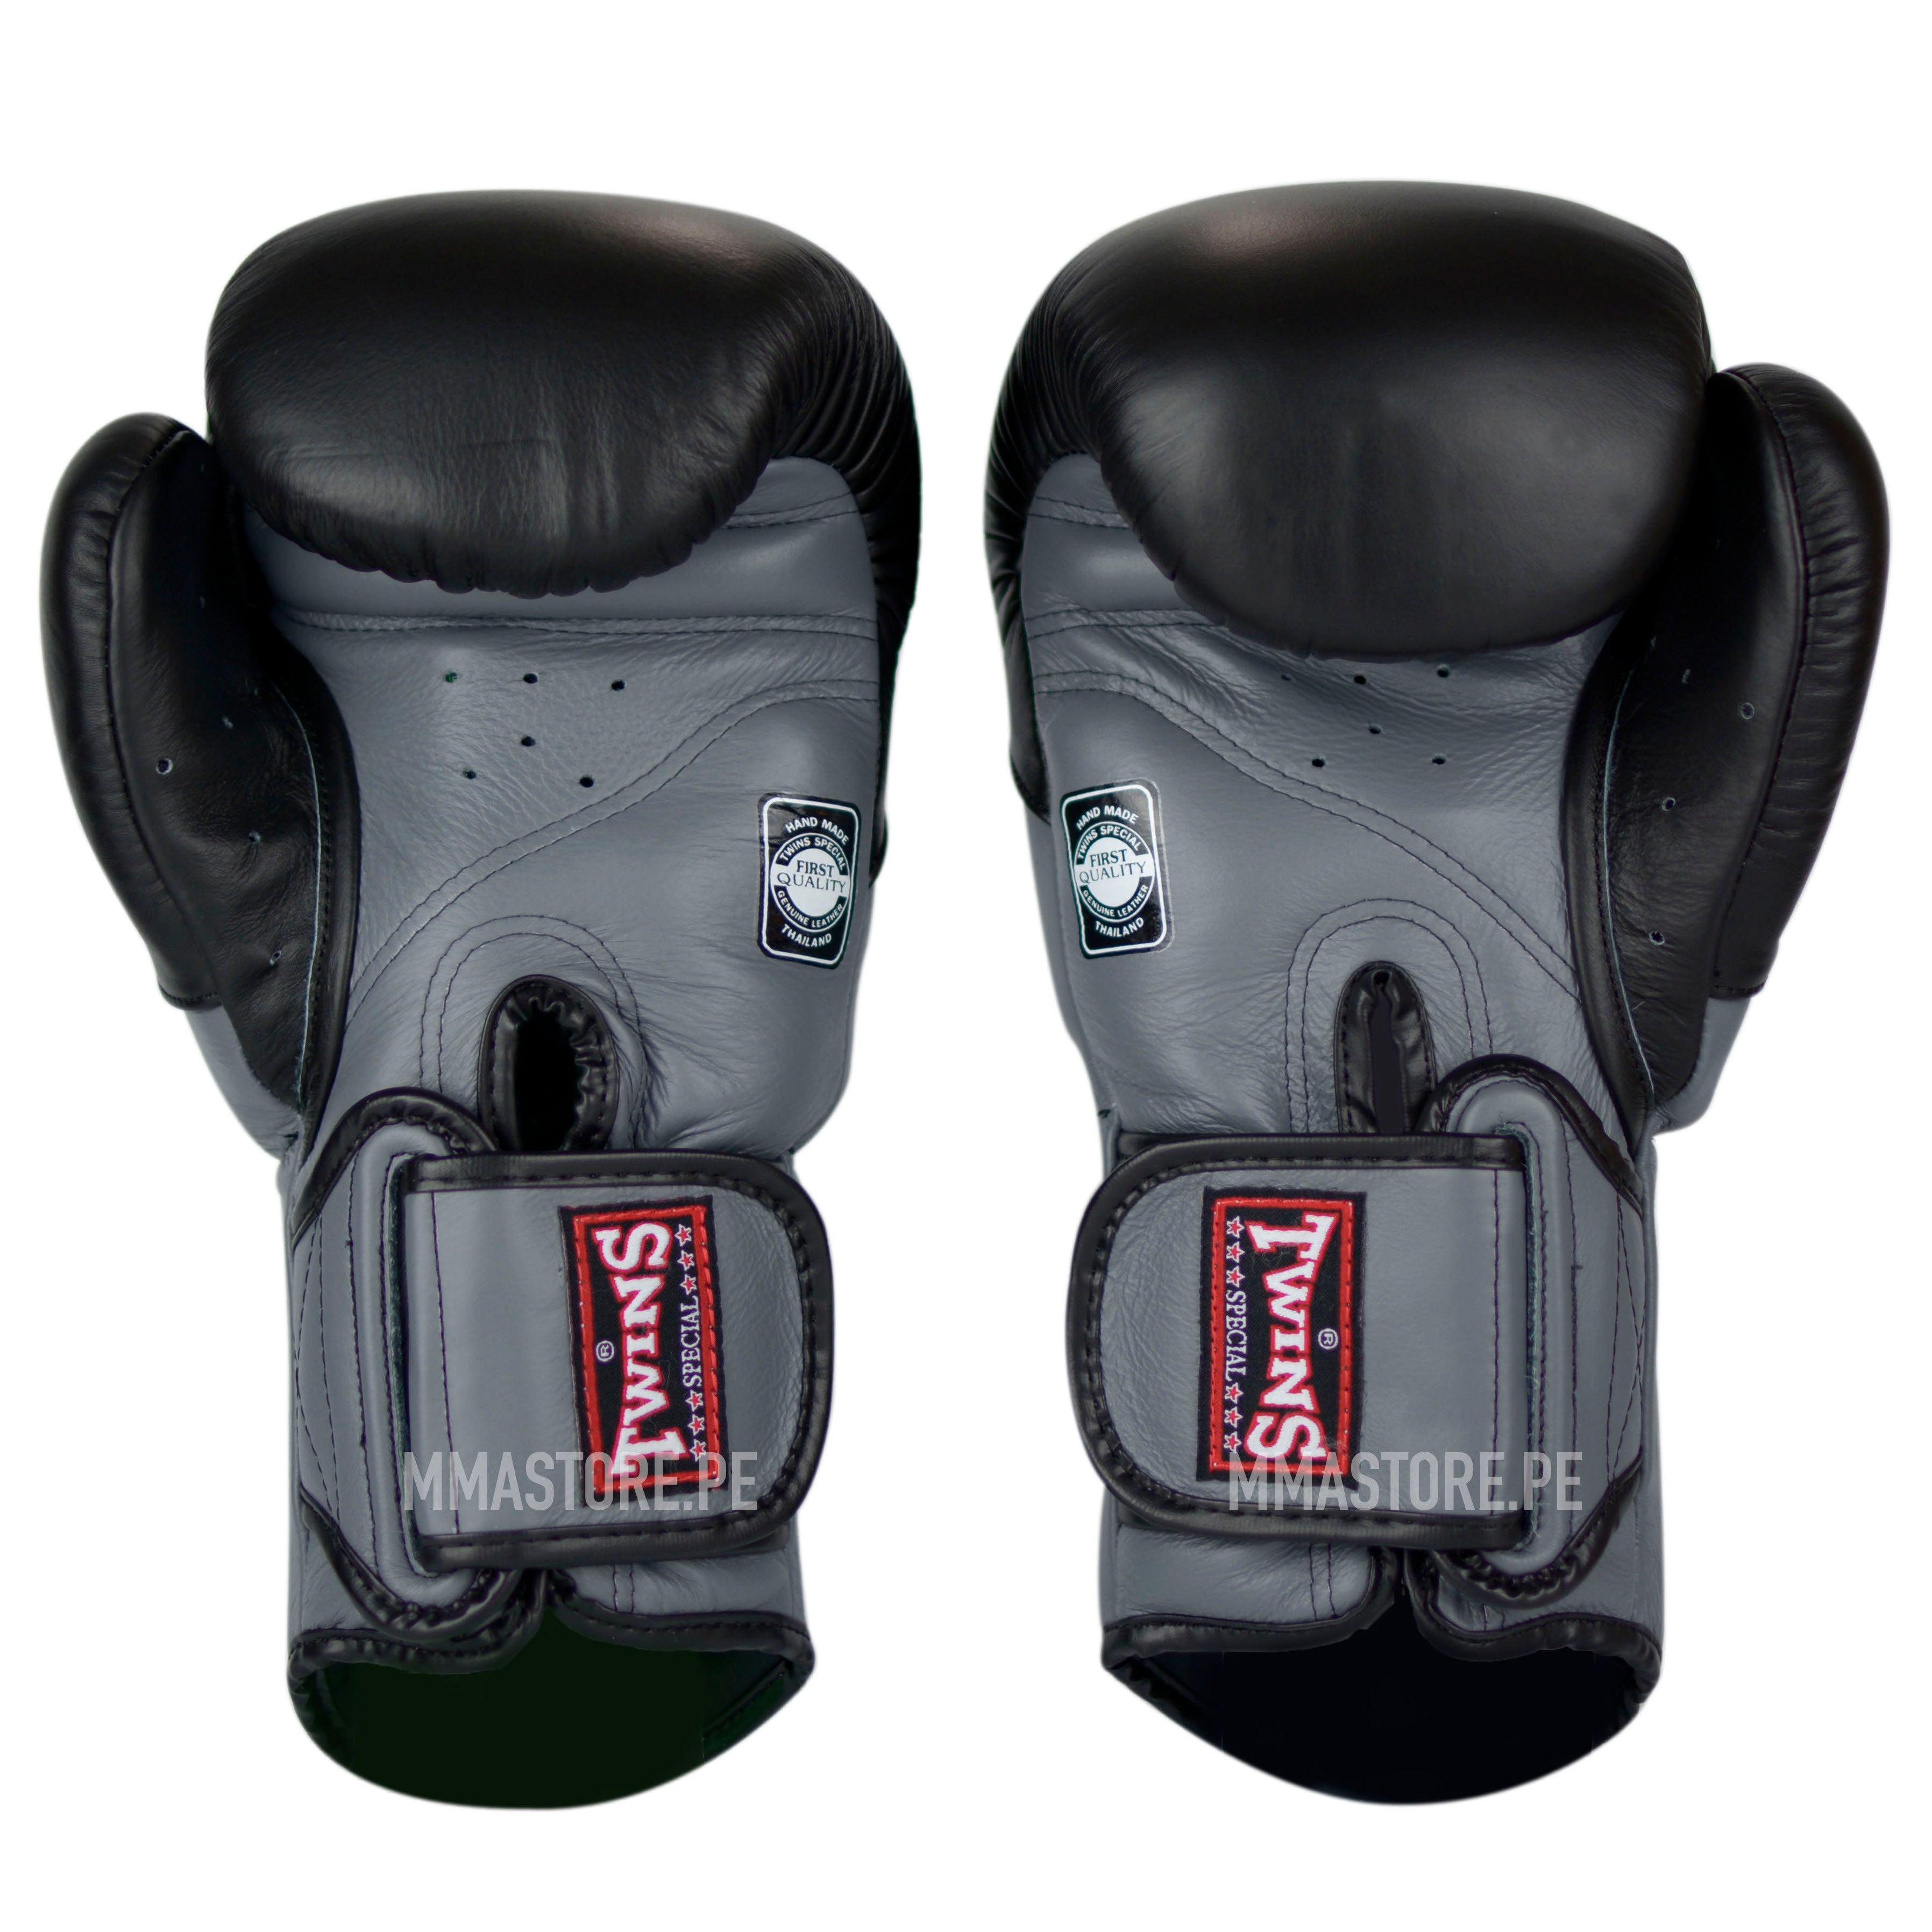 Guantes Twins Special Muay Thai - Boxeo - Extended - Negro- Gris - 100% Cuero - MMA Store Peru